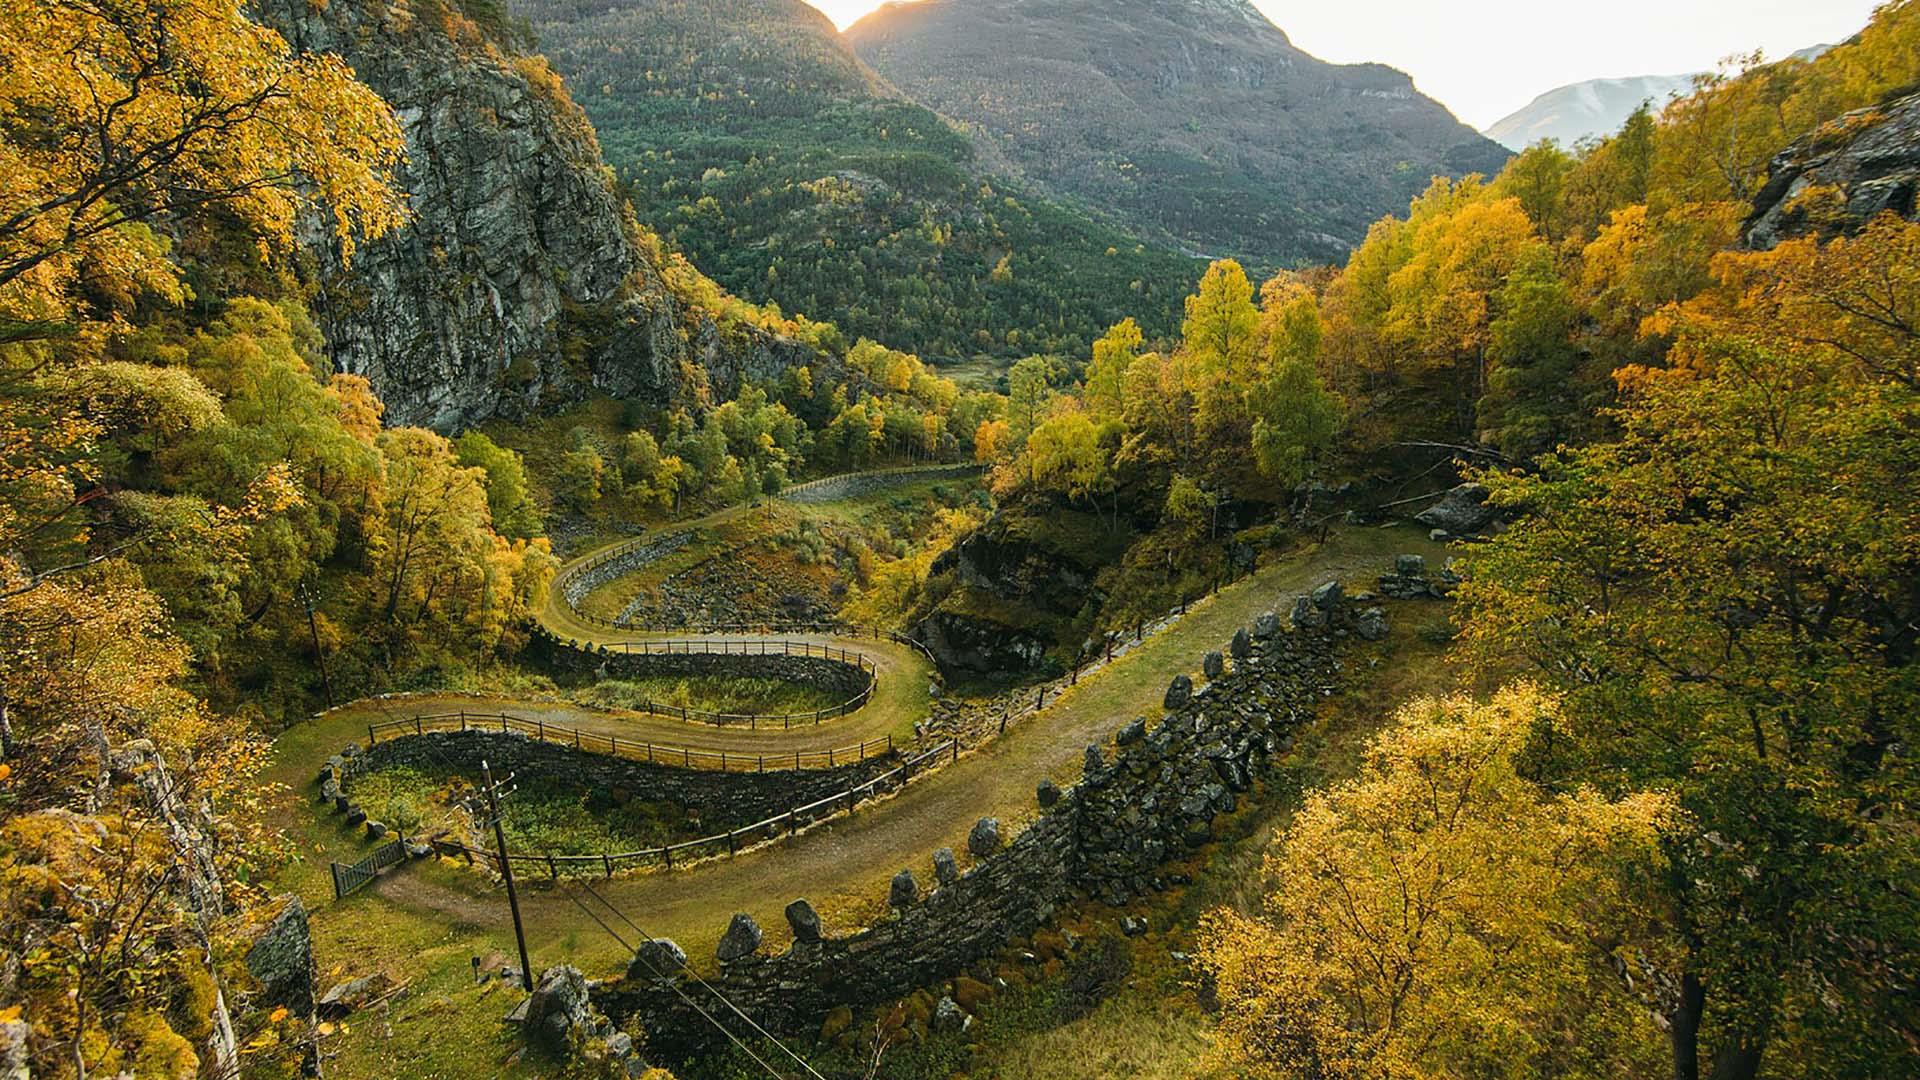 A historical road with grass cover is built up with walls, winding down a hillside in hairpin bends. The birch trees glow in yellow autumn colours in the low sunlight.